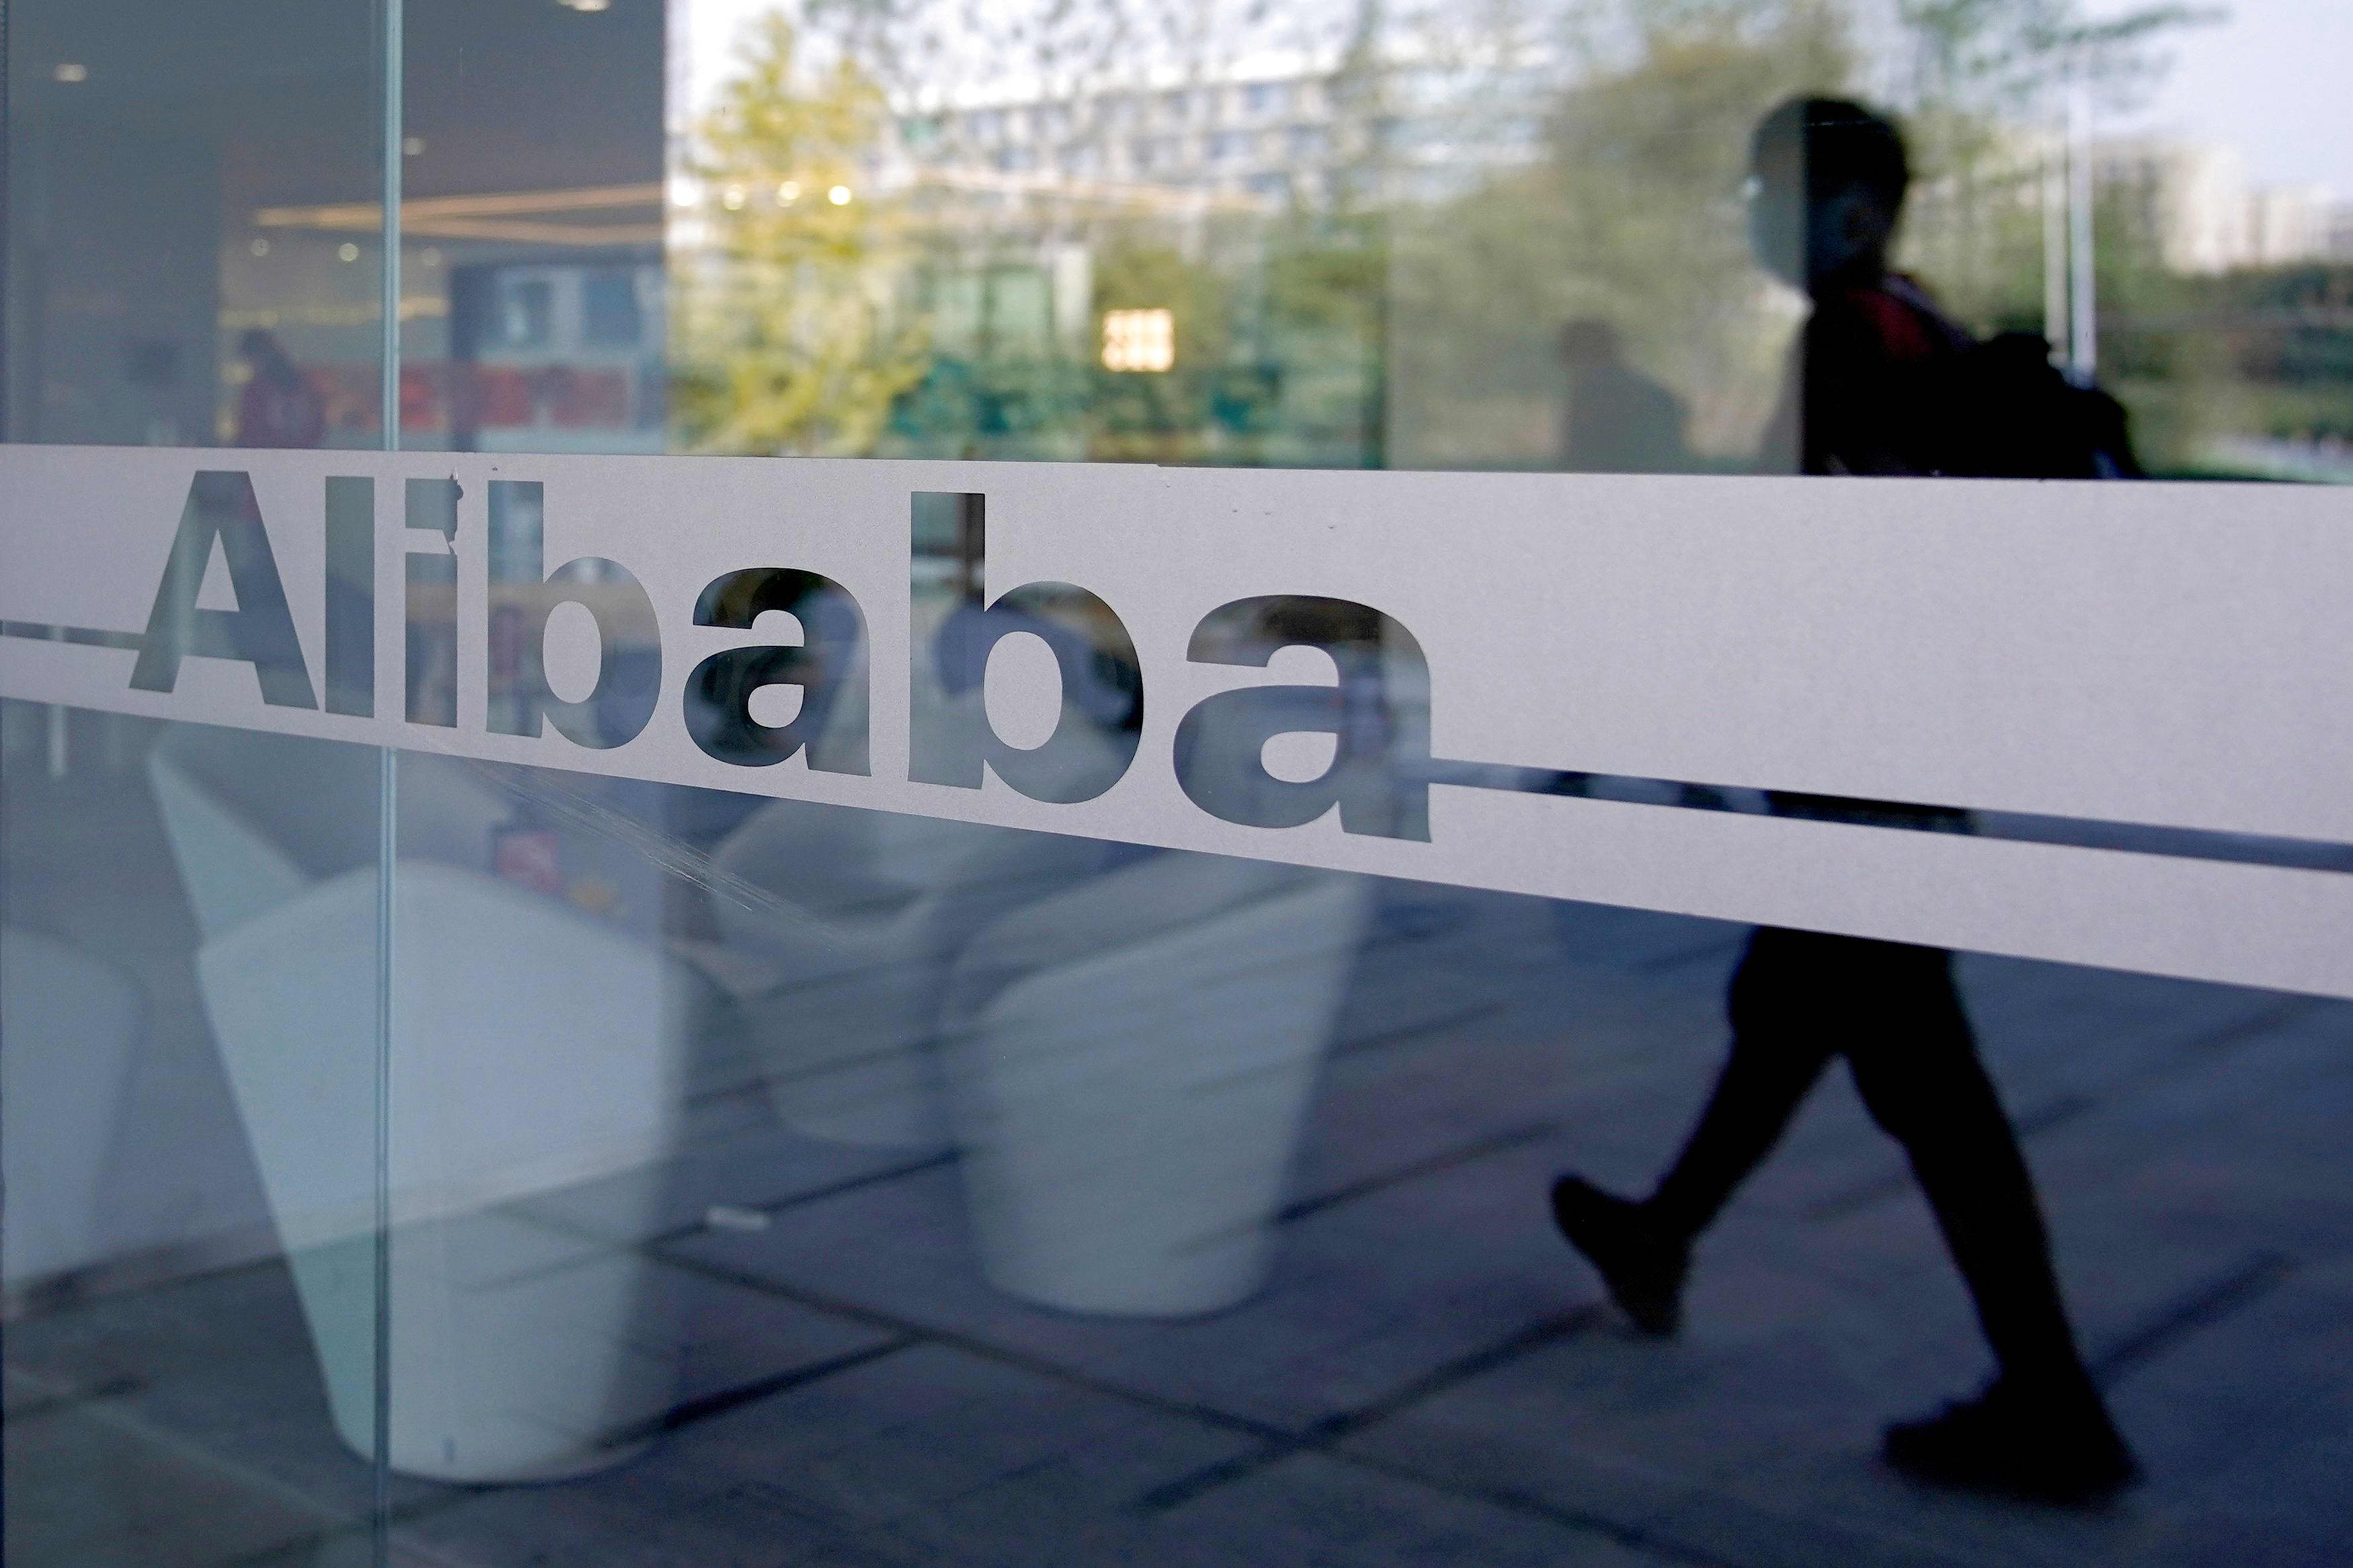 Alibaba shares jump after $ 2.8 billion fine against monopoly